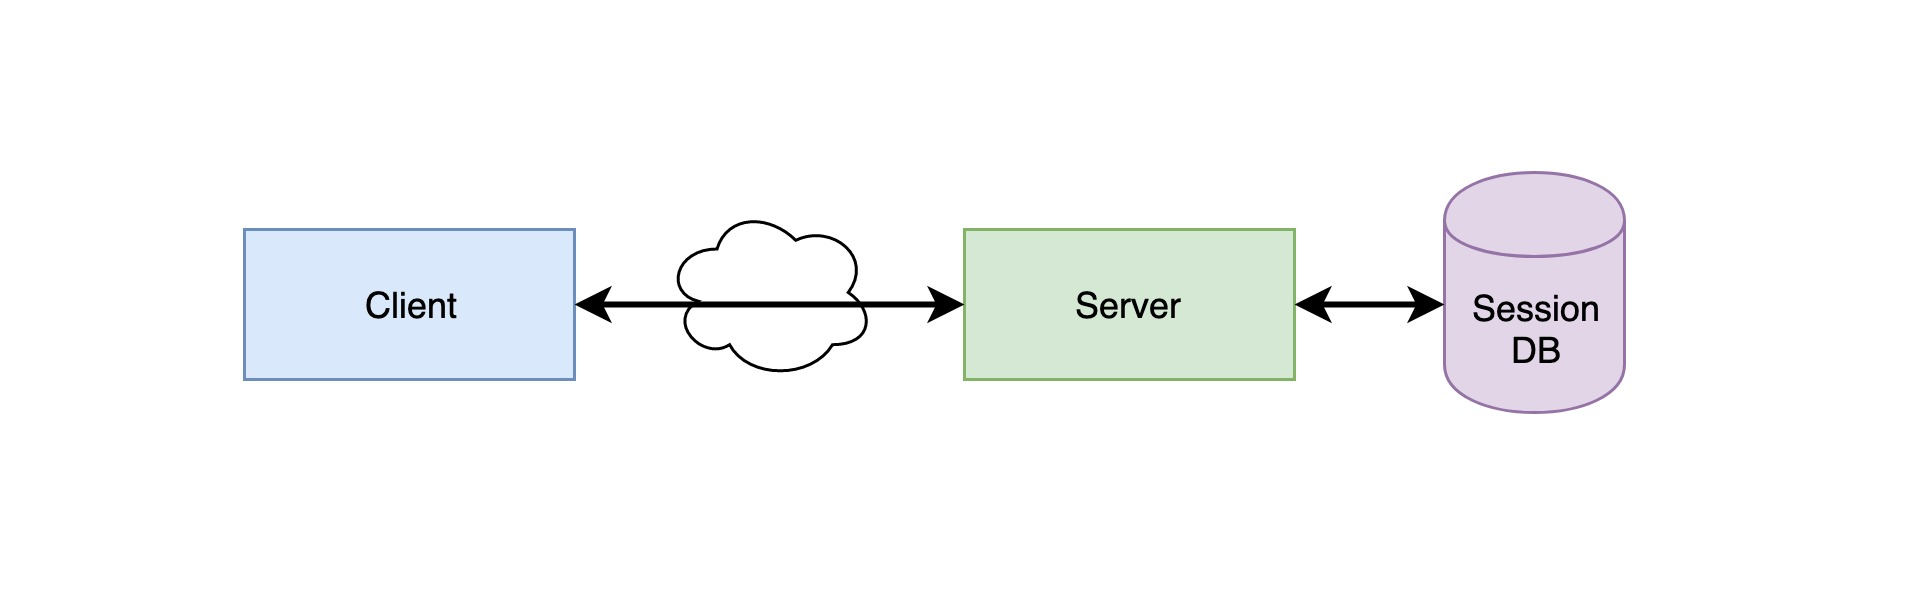 persistent session infrastructure